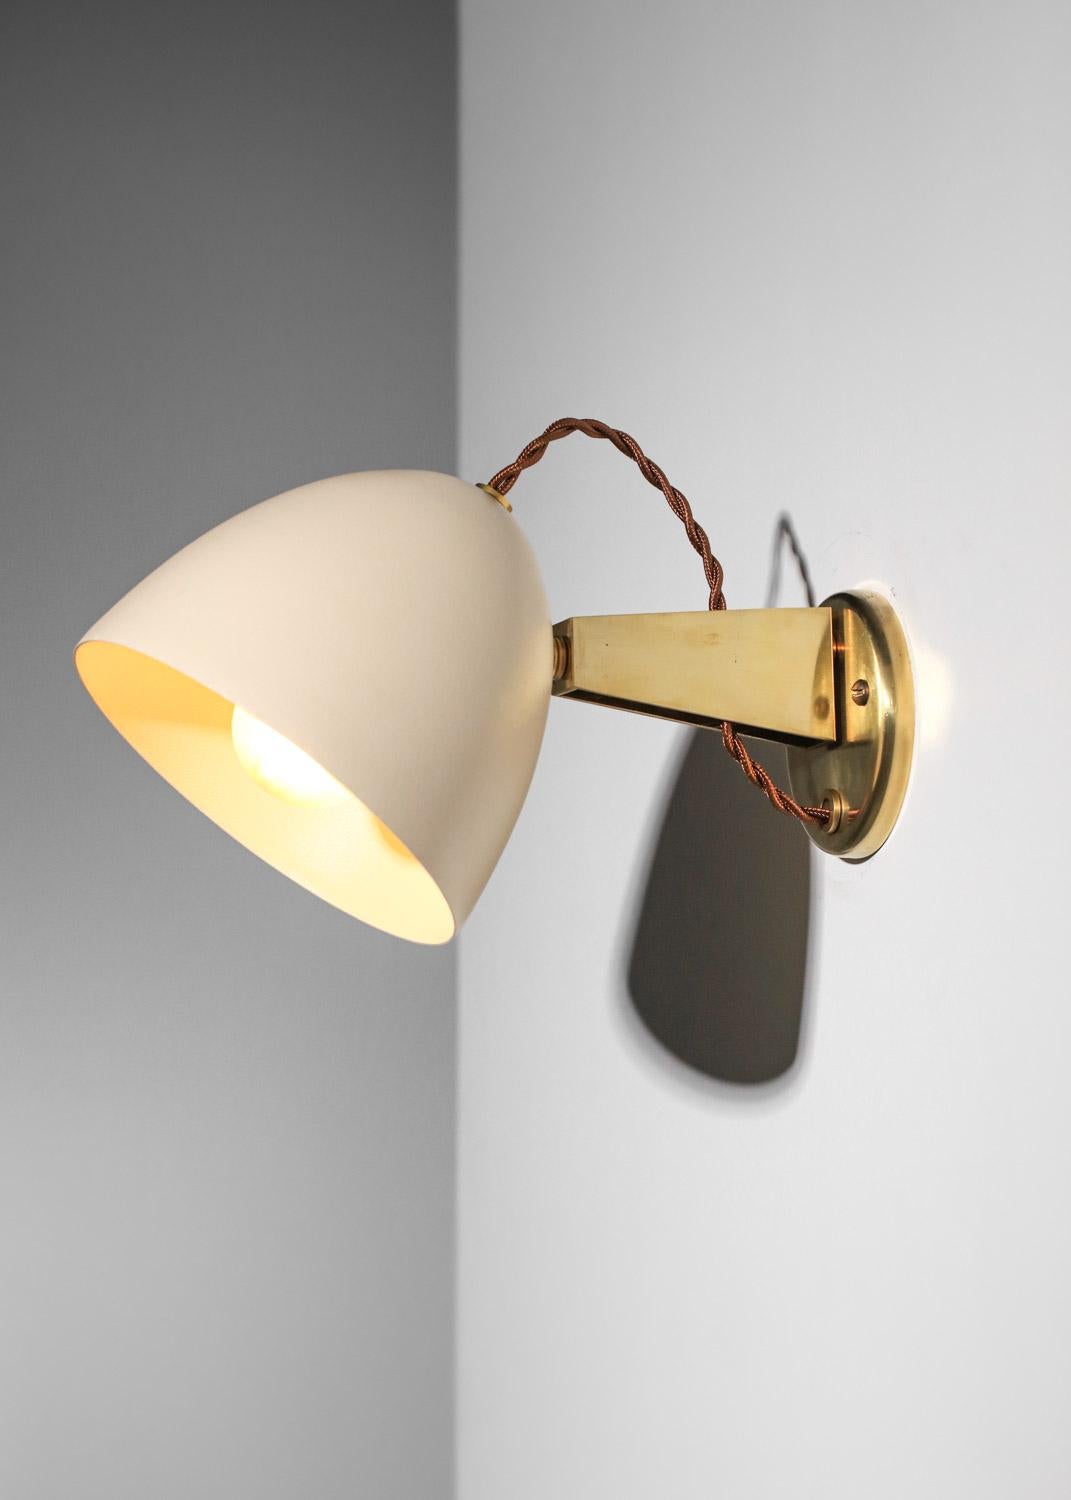 The entire Danke Galerie team is delighted to present this new pair of sconces designed in our studio to enrich our range of modern, timeless lighting fixtures. Particular attention has been paid to the details of the finish and the patina of the